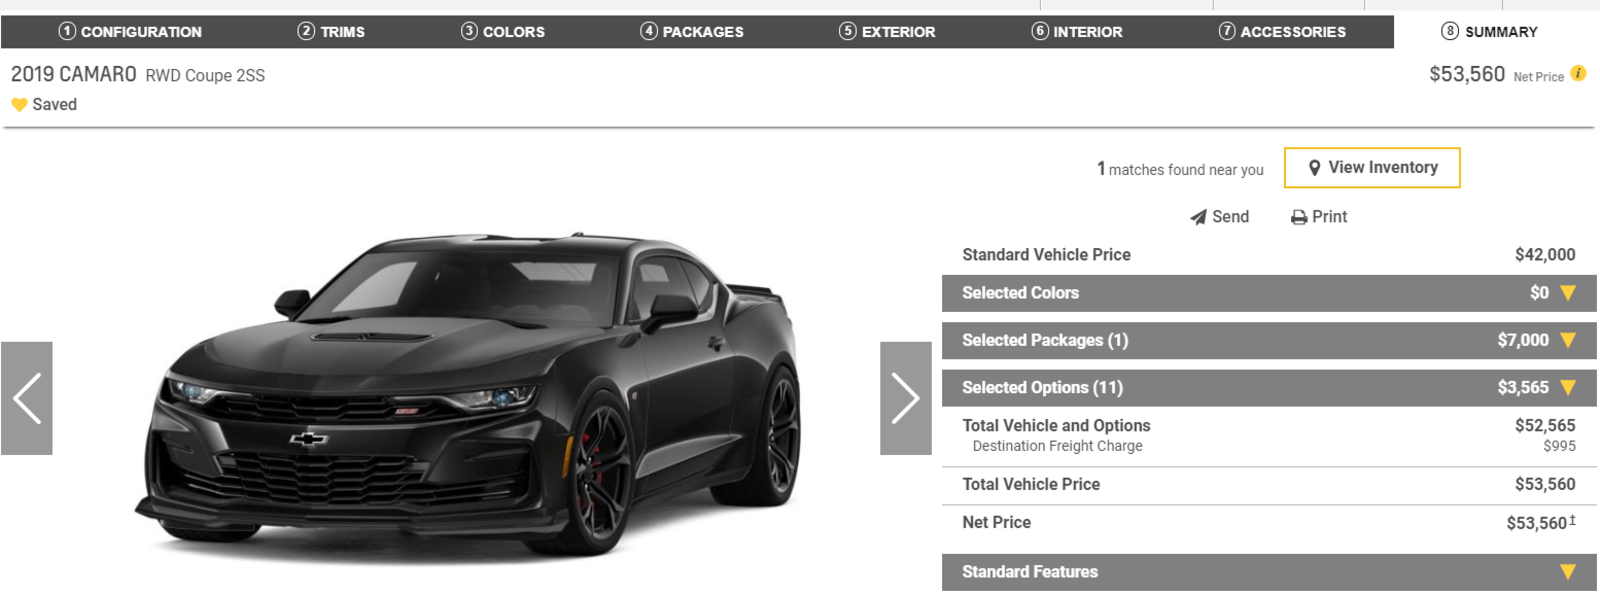 Illustration for article titled The 2019 Camaro configurator is online